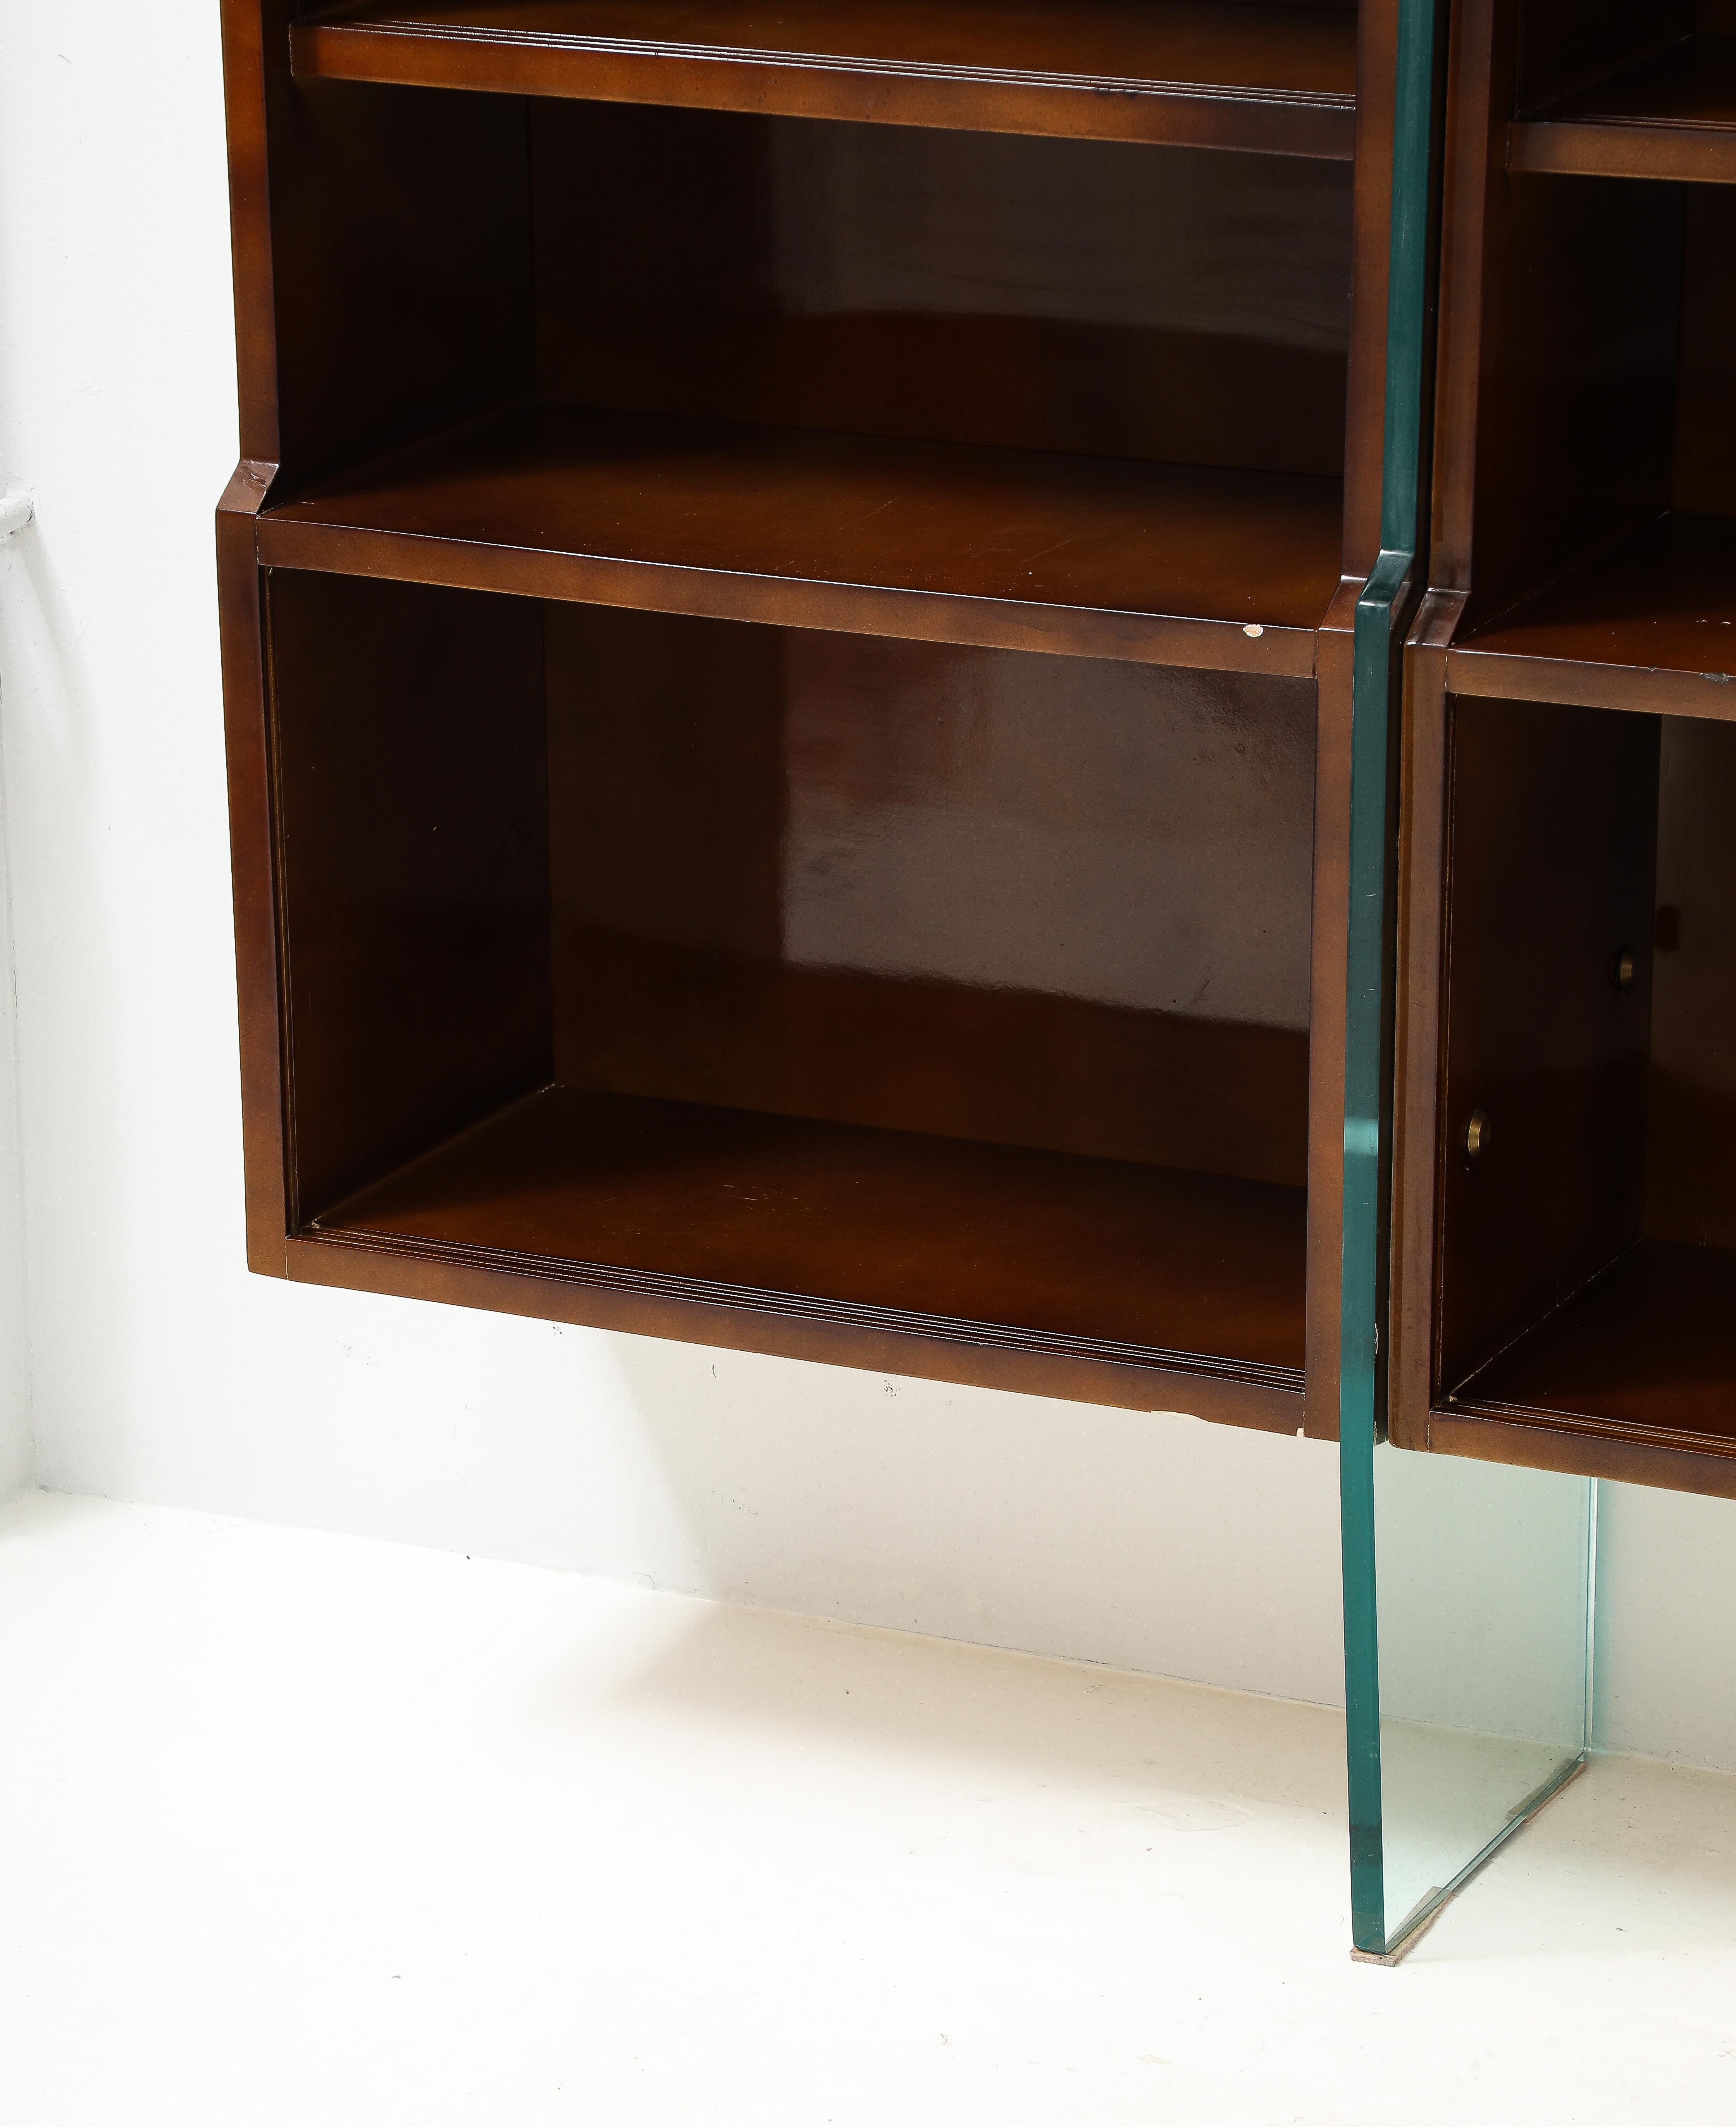 Raphael Raphel Bookcase in Lacquered Wood & Glass, France 1950's For Sale 5